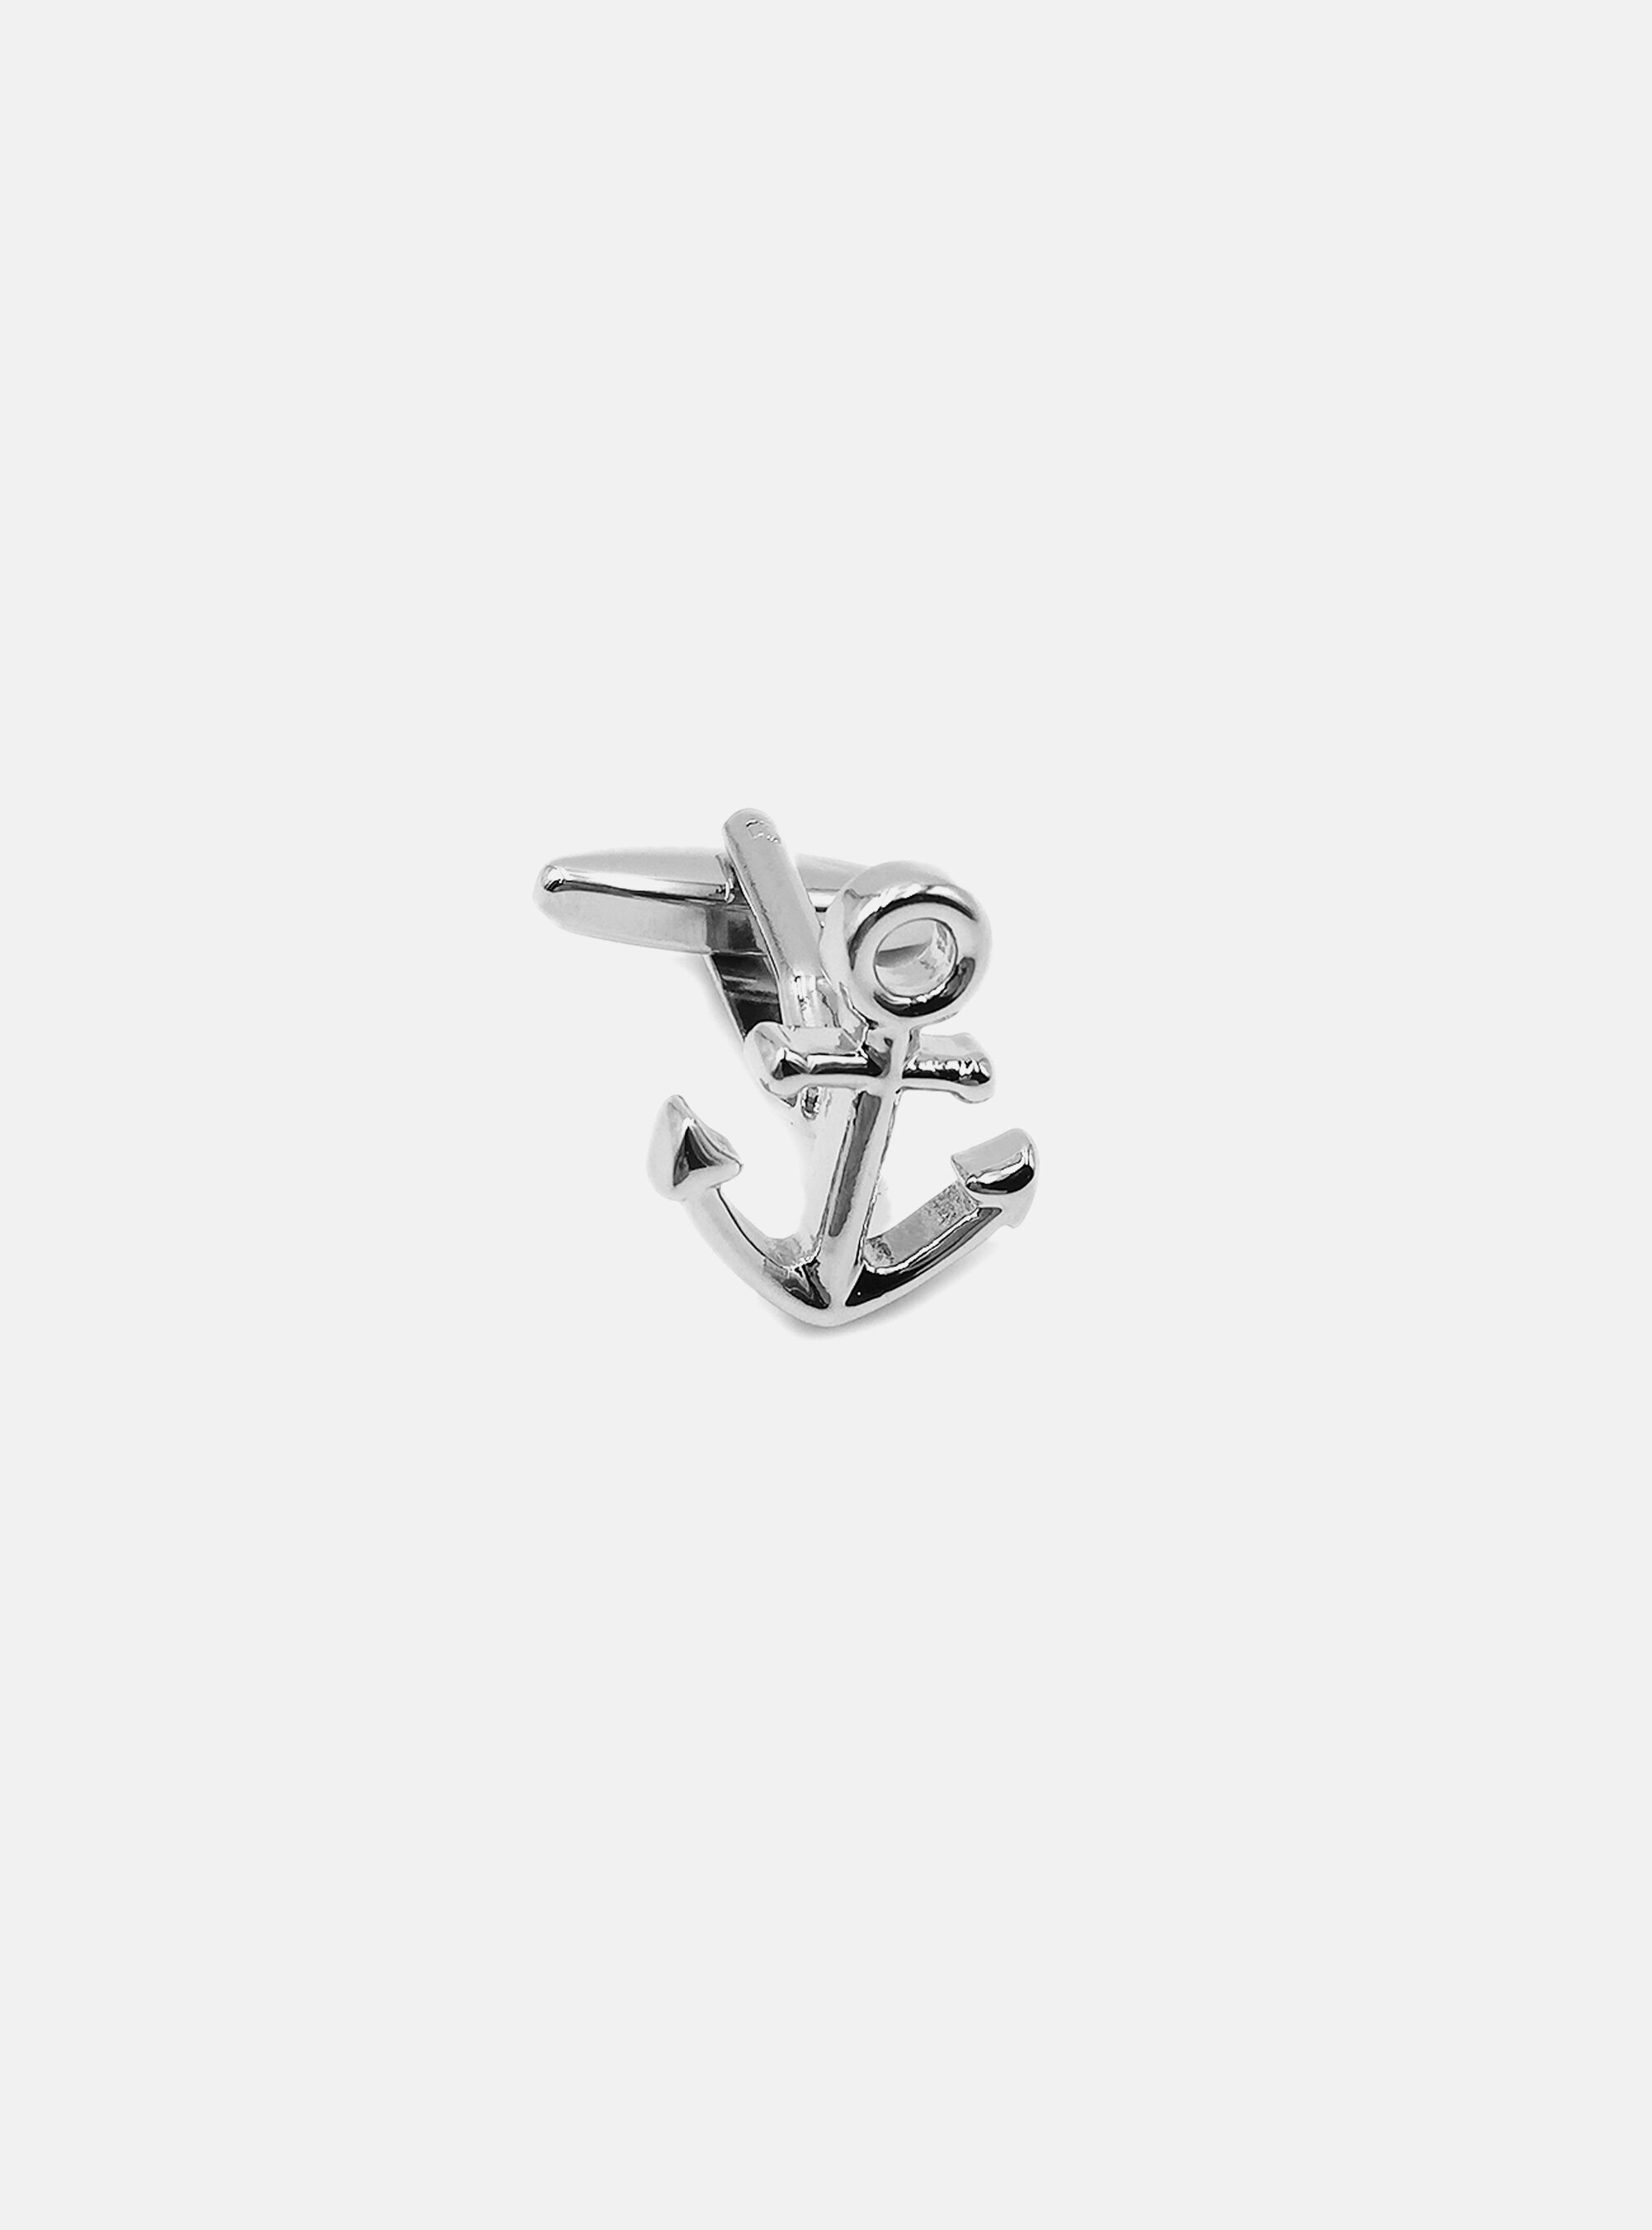 Details about   NEW GOLD-TONE 7/8 INCH TALL CUFFLINKS IN THE SHAPE OF AN ANCHOR 